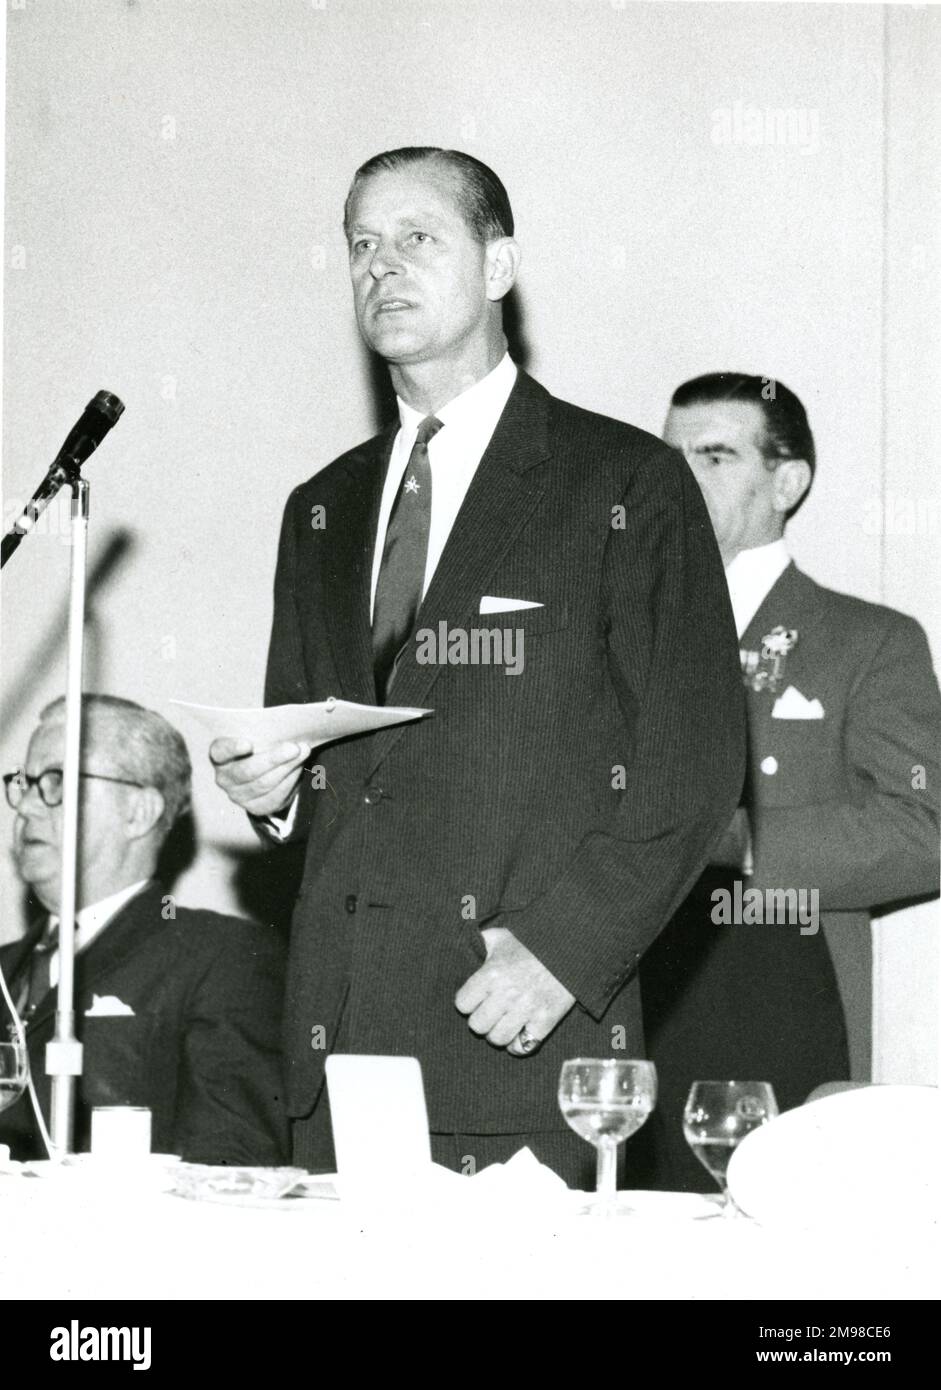 HRH The Prince Philip, Duke of Edinburgh, Honorary President, Royal Aeronautical Society, proposes the toast at the Luncheon given by the President and Council on 5 May 1966 at the Europa Hotel, London. Stock Photo